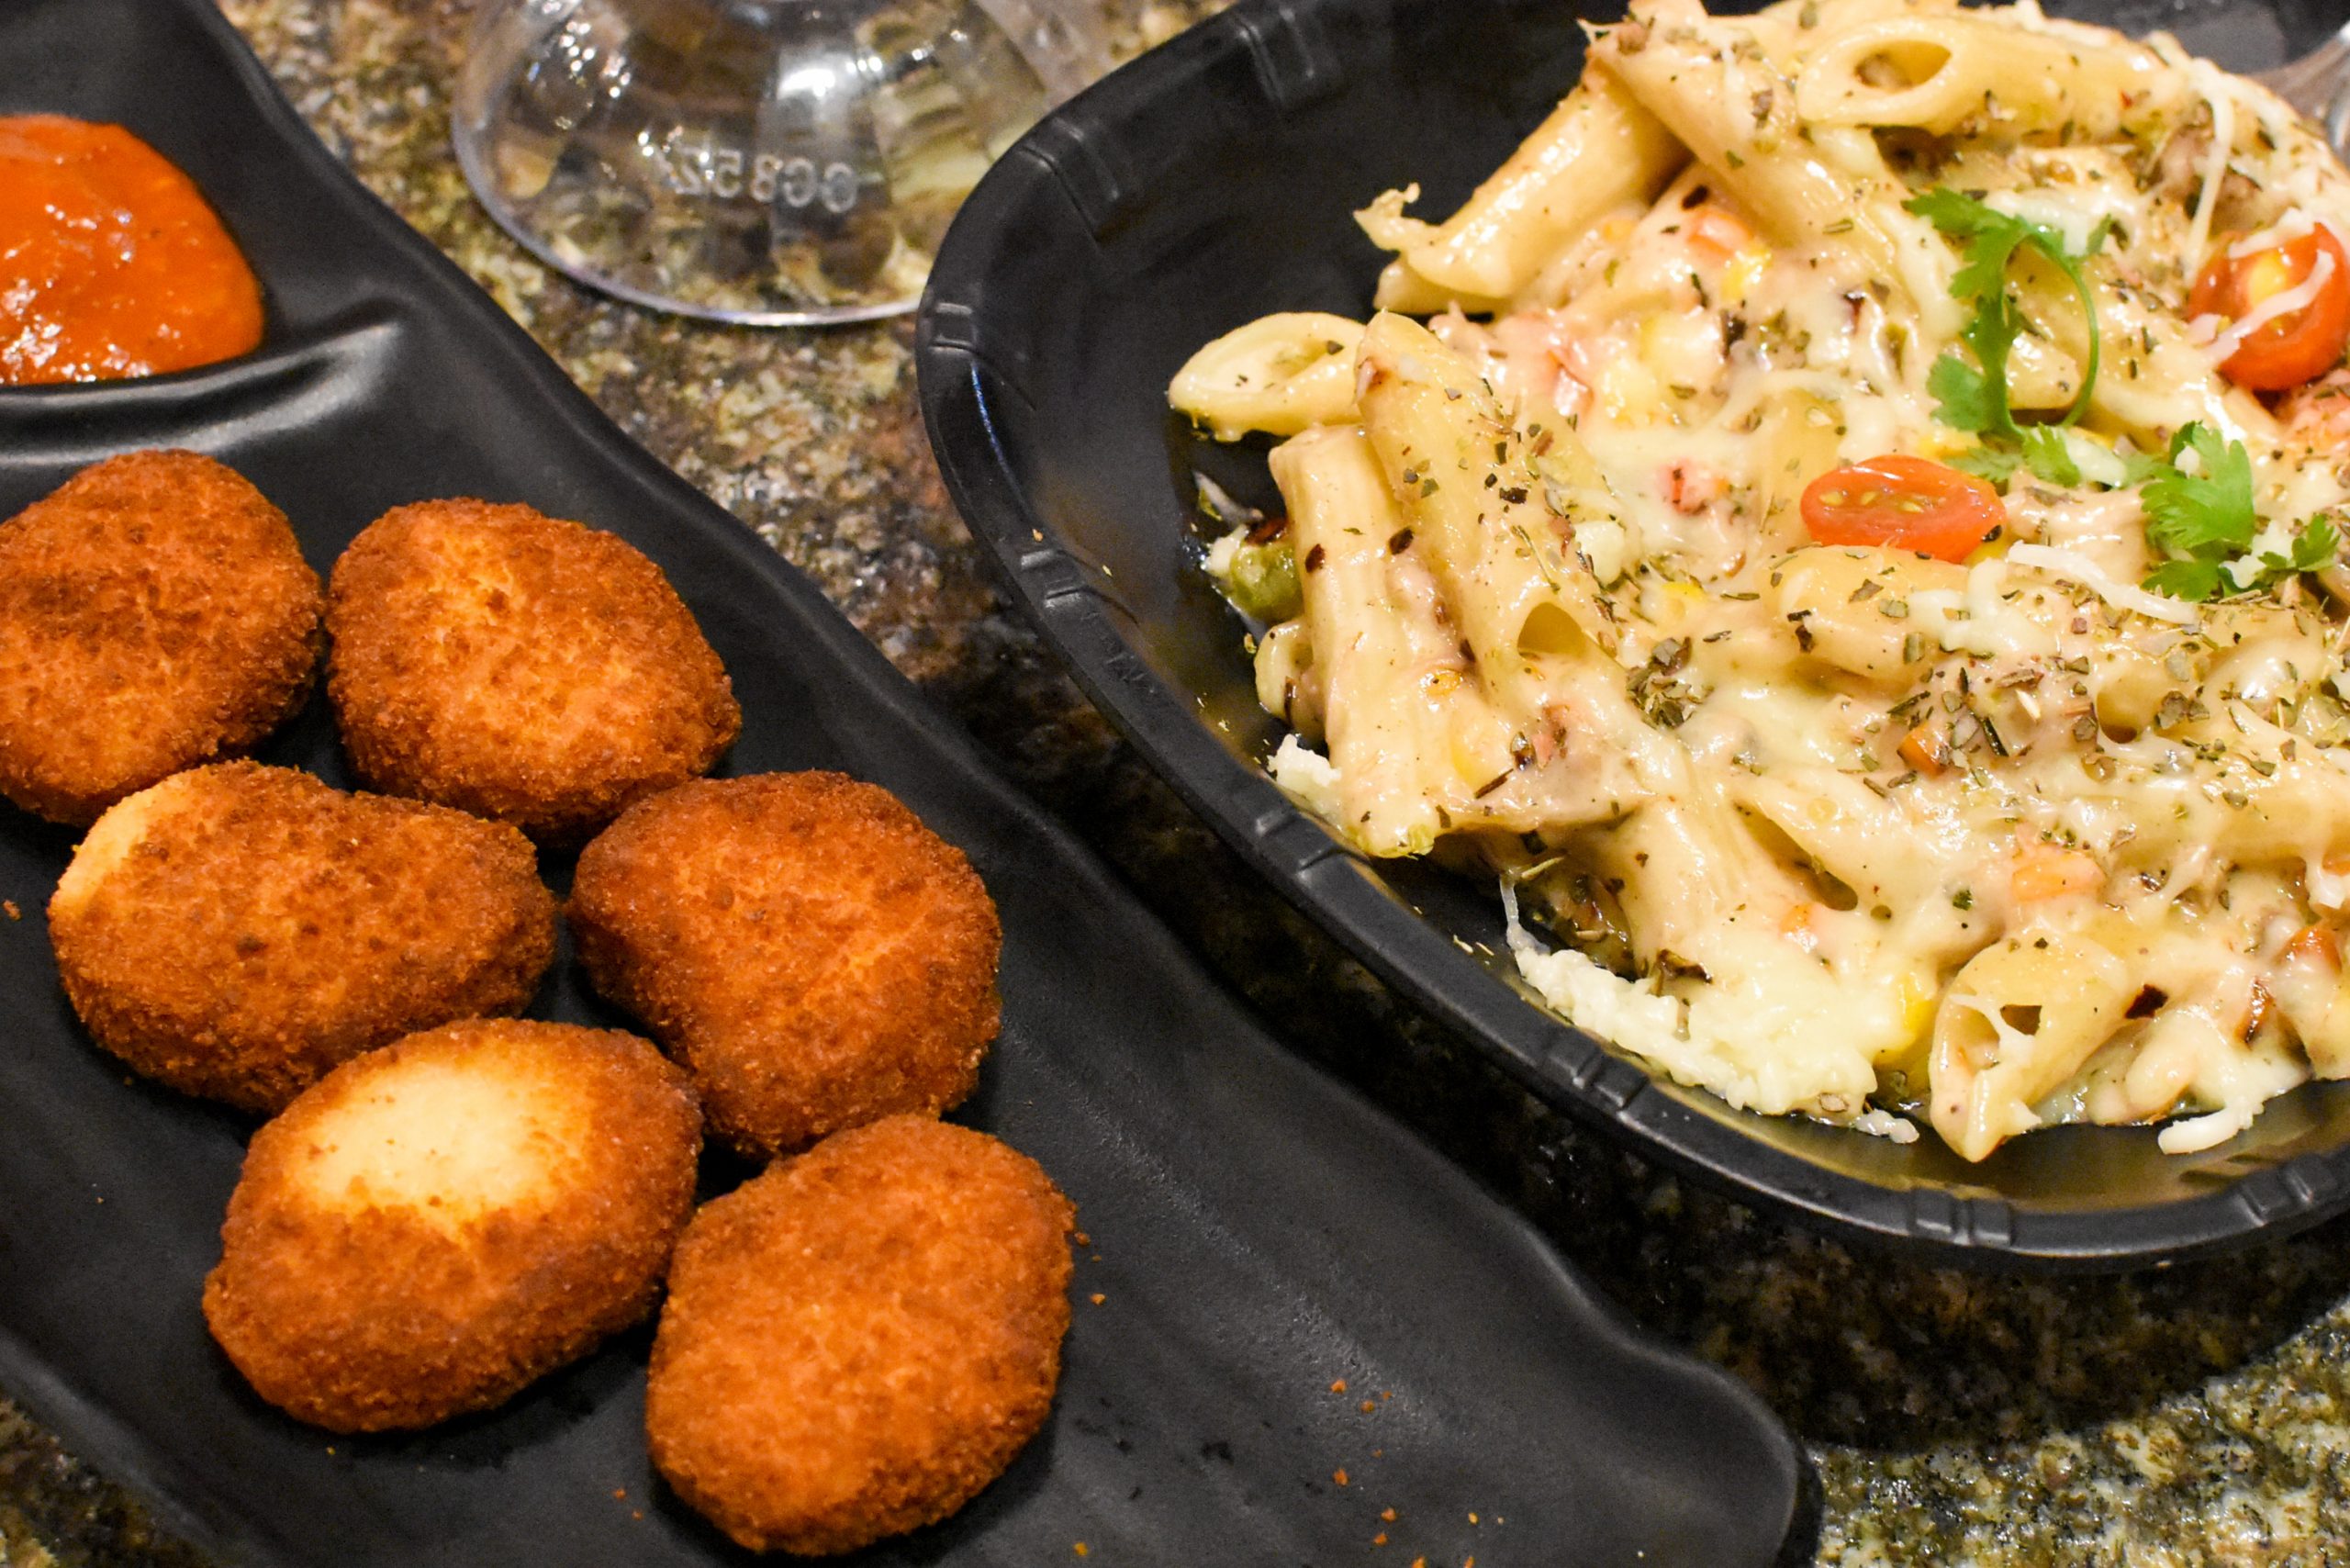 Bread cutlet and pasta appetizer